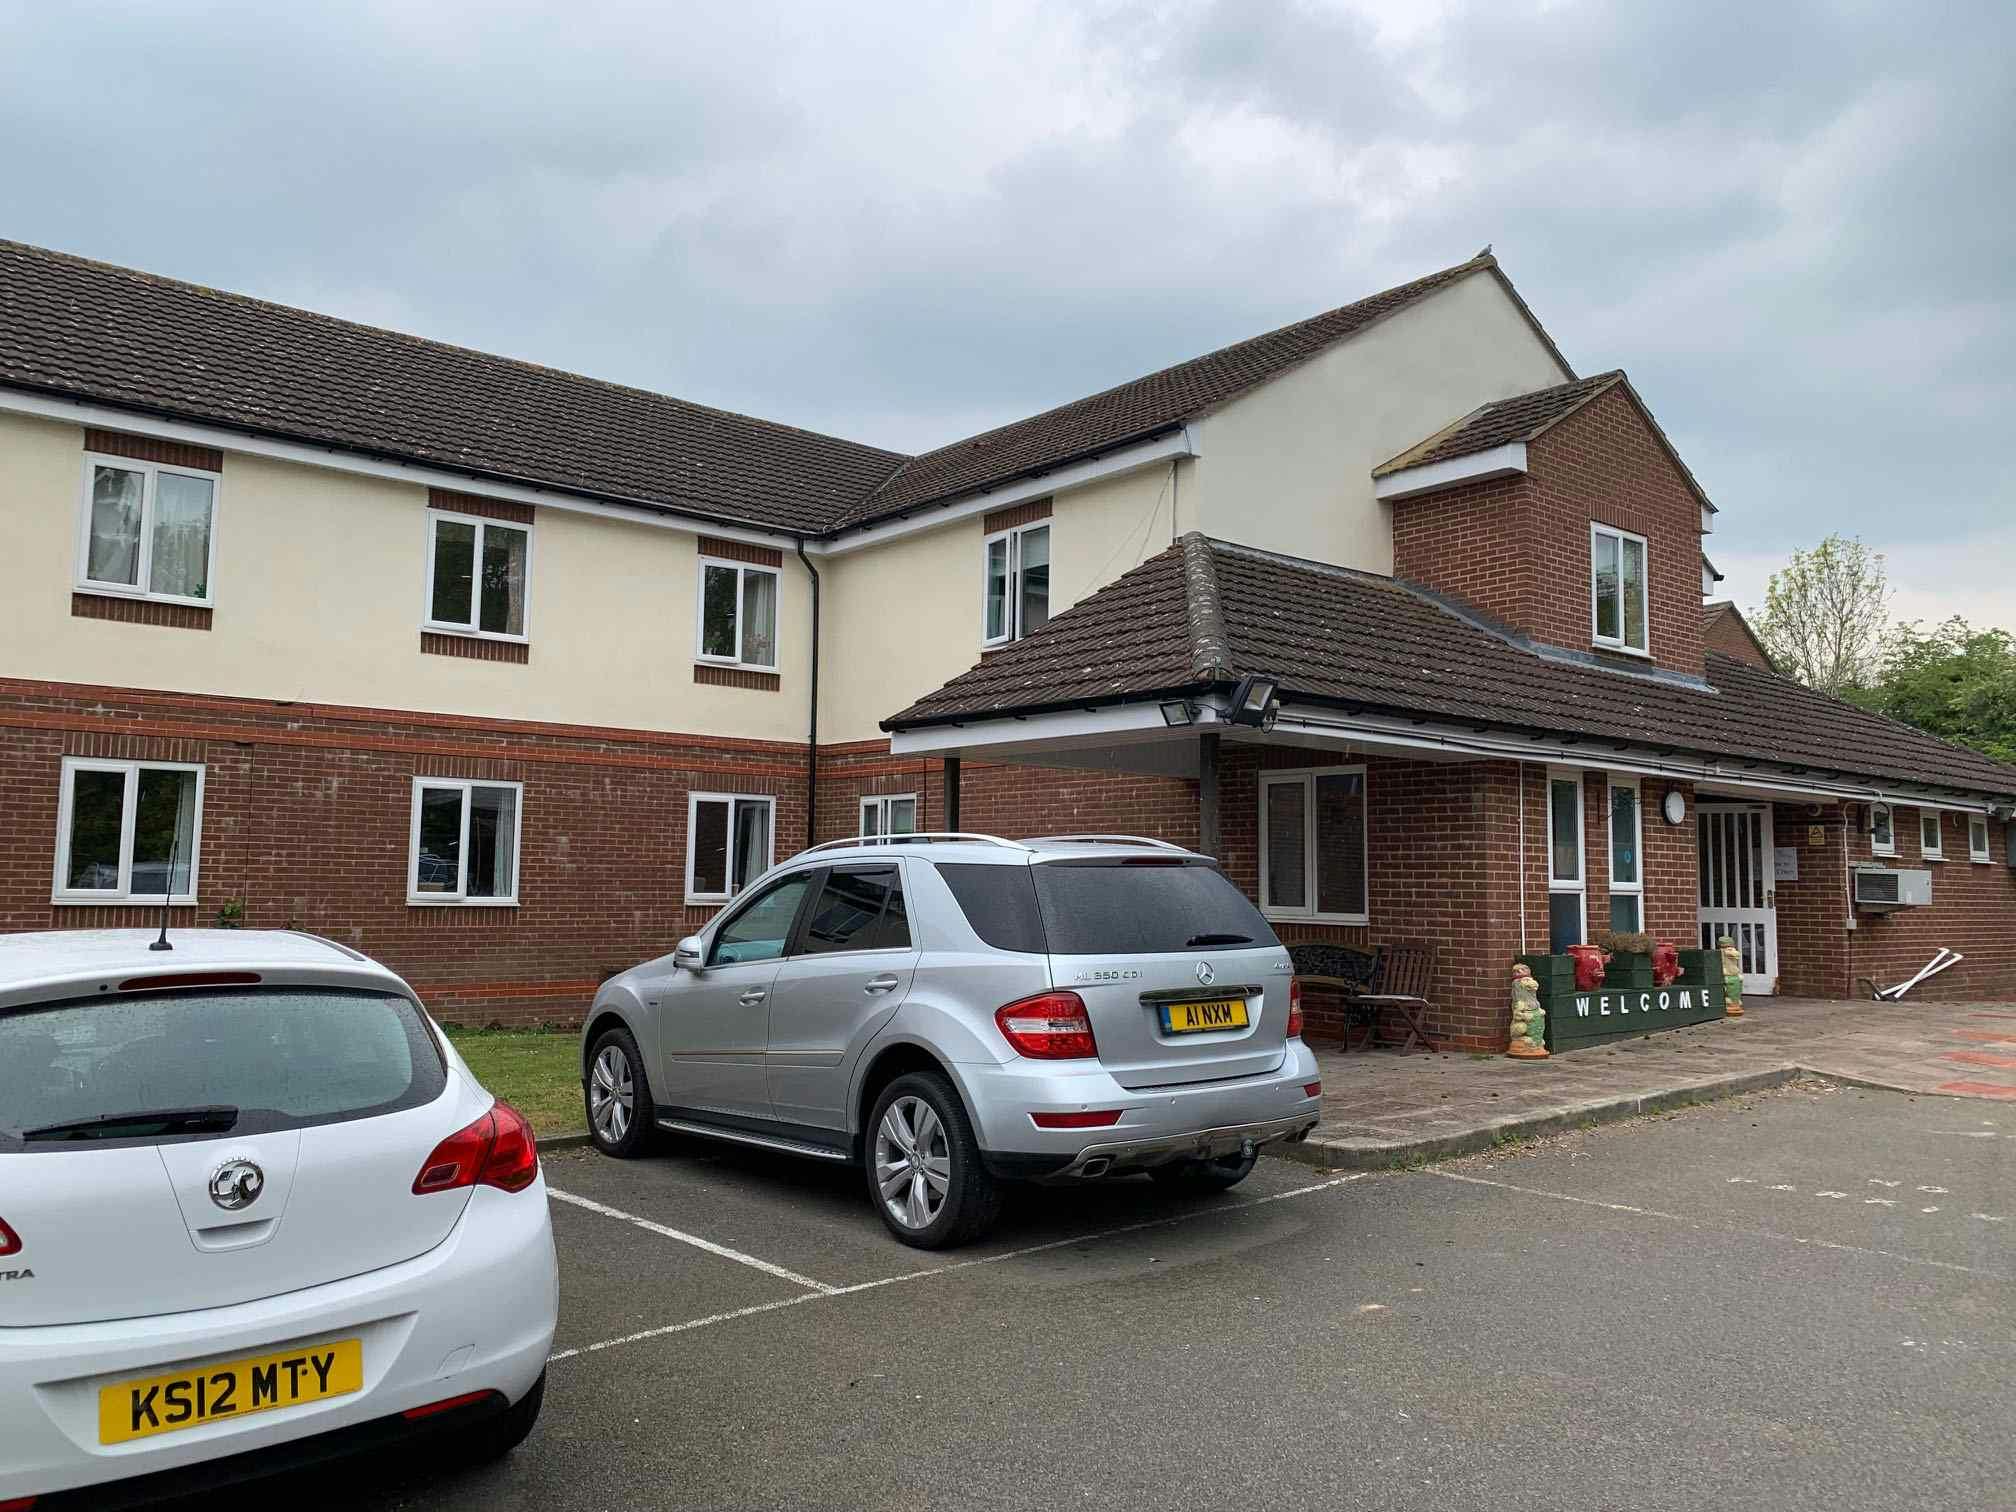 Cheaney Court care home